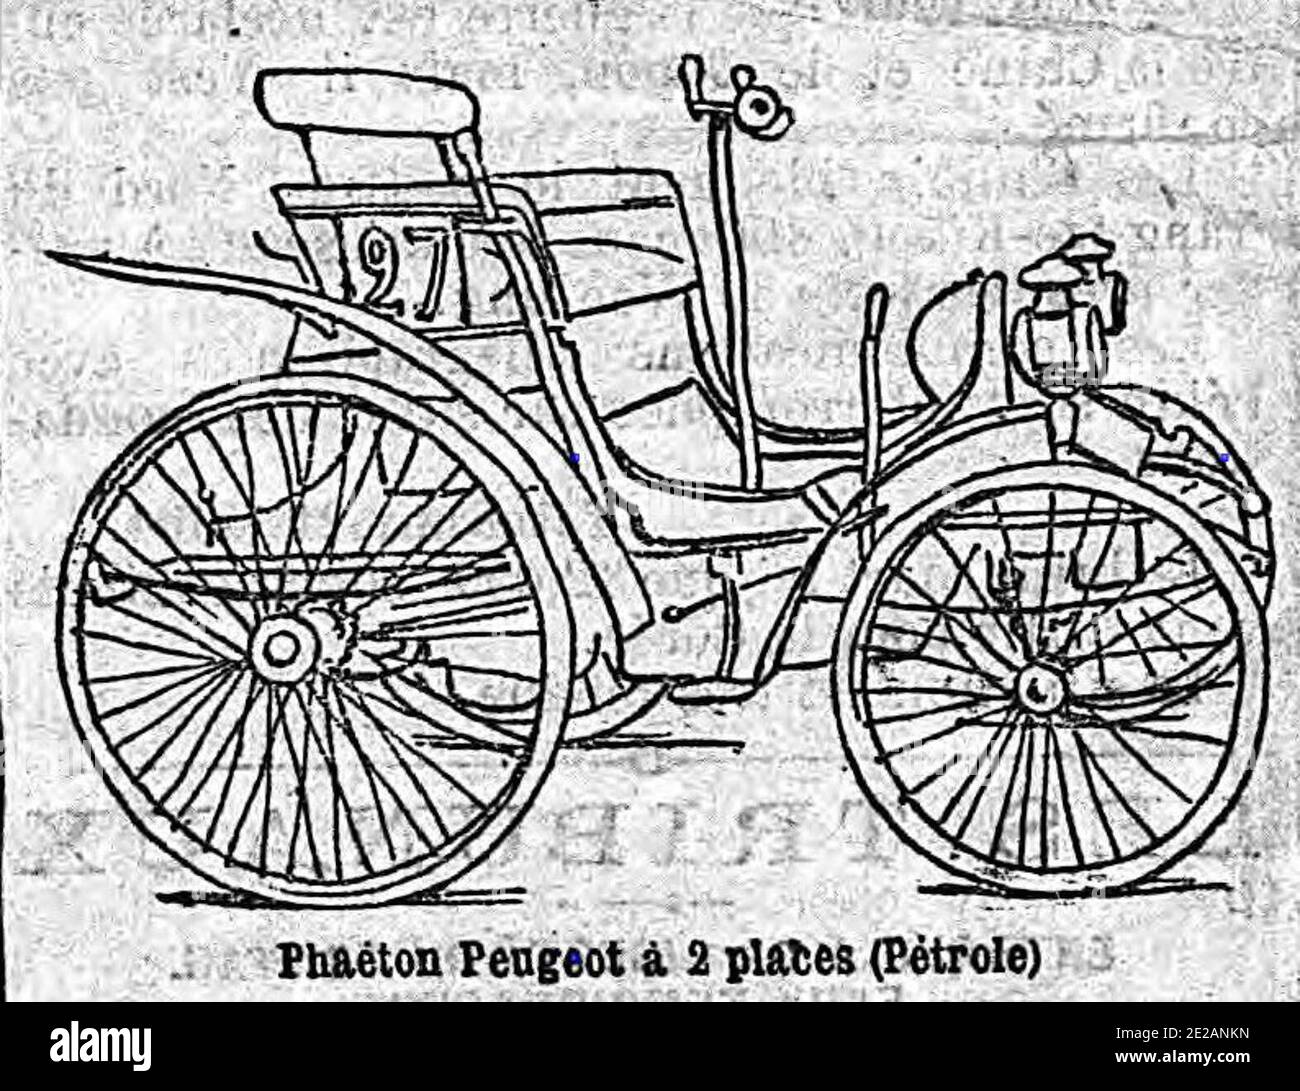 Phaeton Peugeot petrol driven by Louis Rigoulot finished 11th in the Le Petit Journal - Contest for Horseless Carriages, Paris-Rouen. Le Petit Journal 22 July 1894 Stock Photo